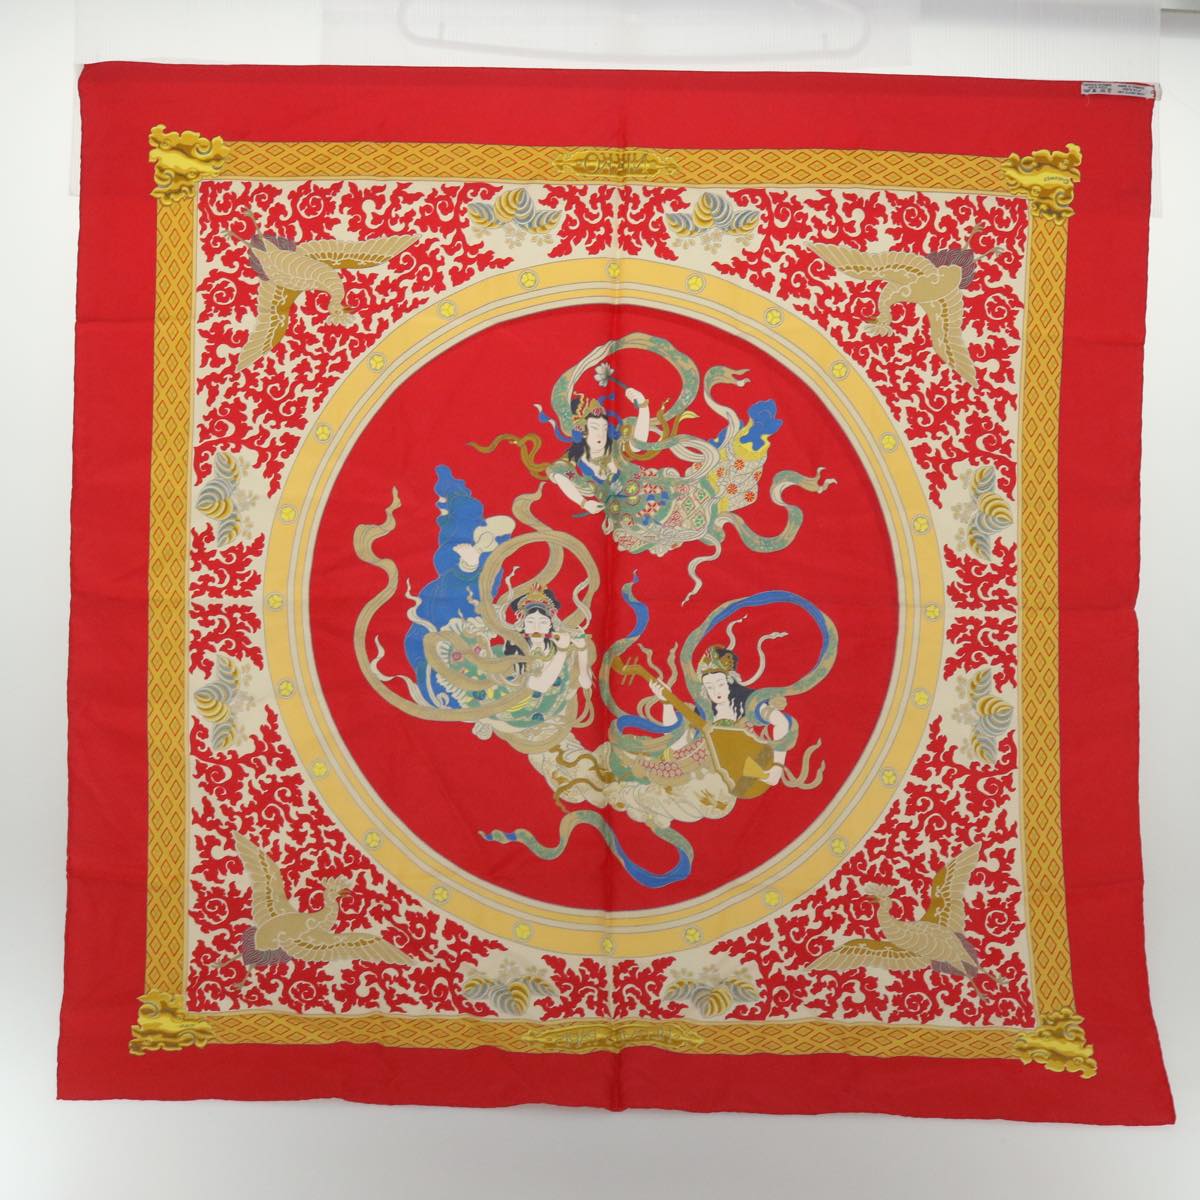 HERMES Carre 90 NIKKO Scarf Silk Red Auth am4977